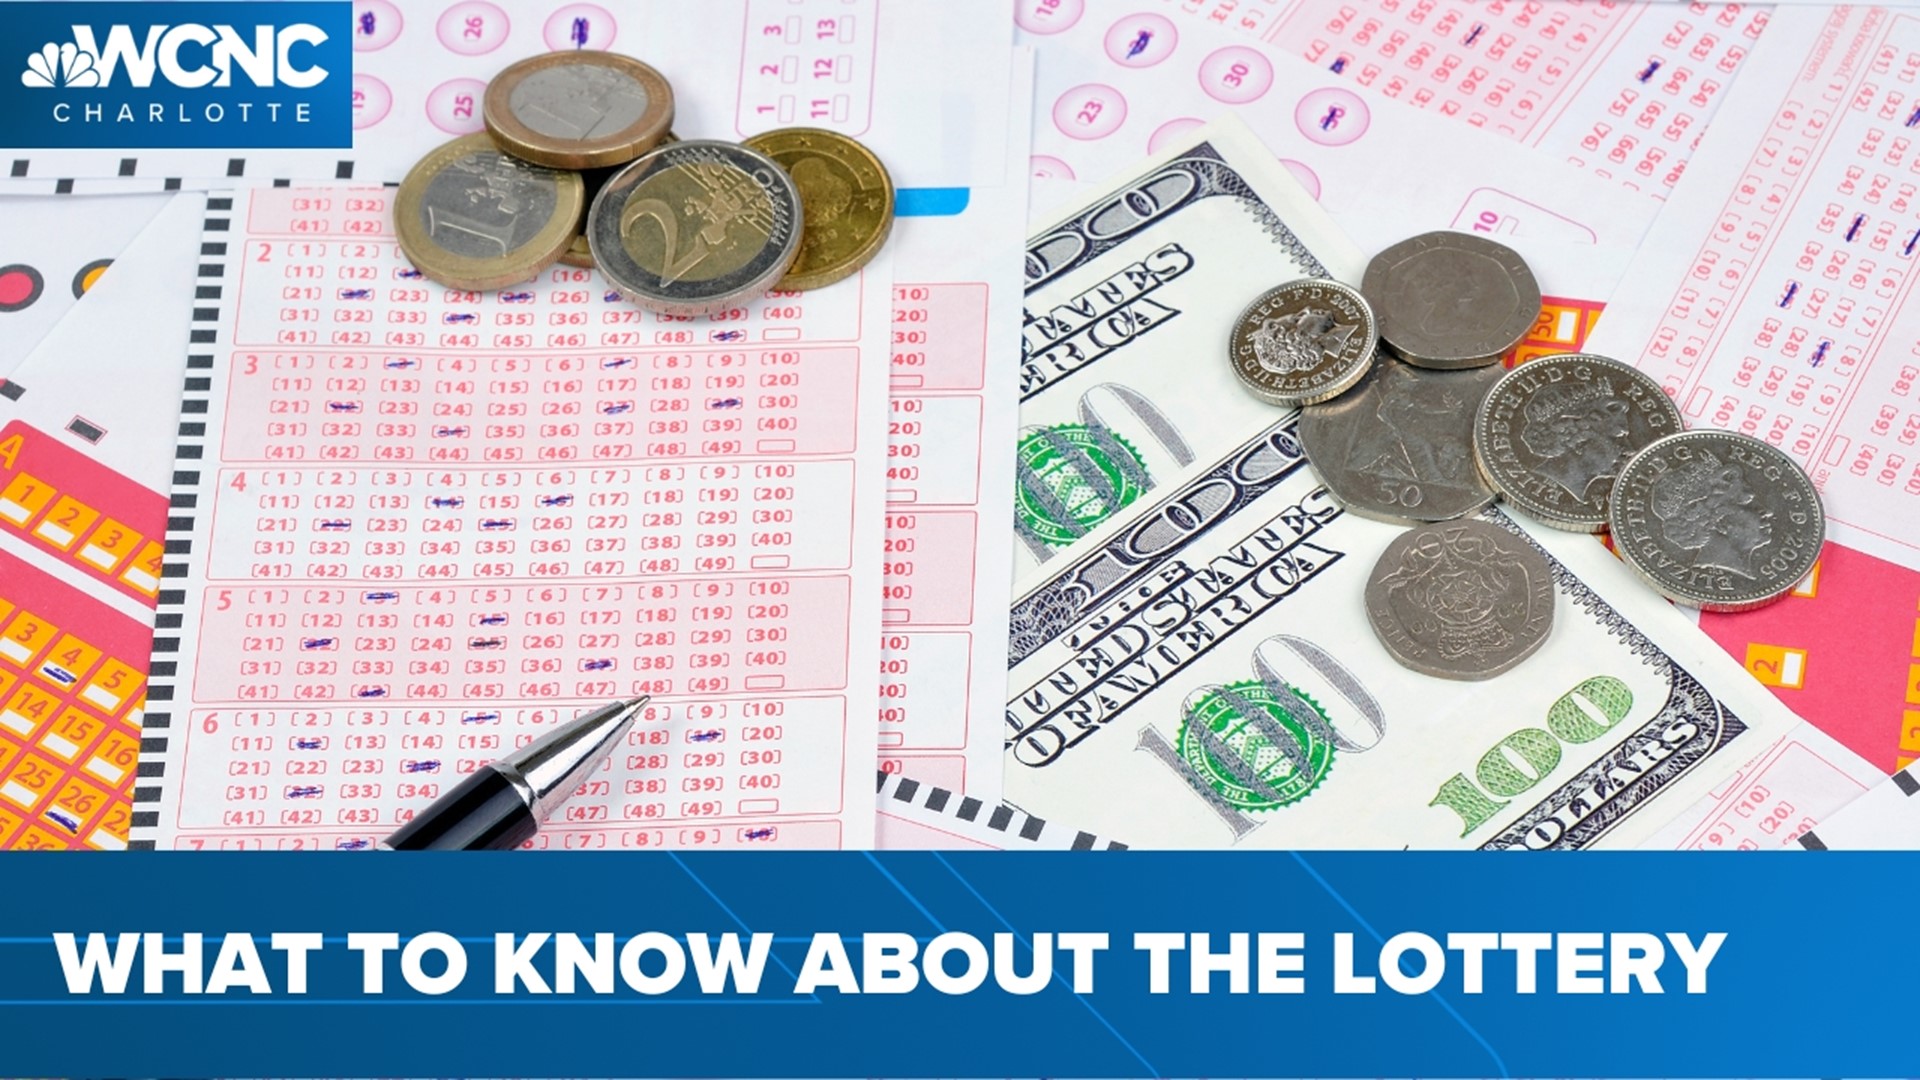 Our VERIFY team is fact-checking North Carolina's lottery rules and regulations tonight